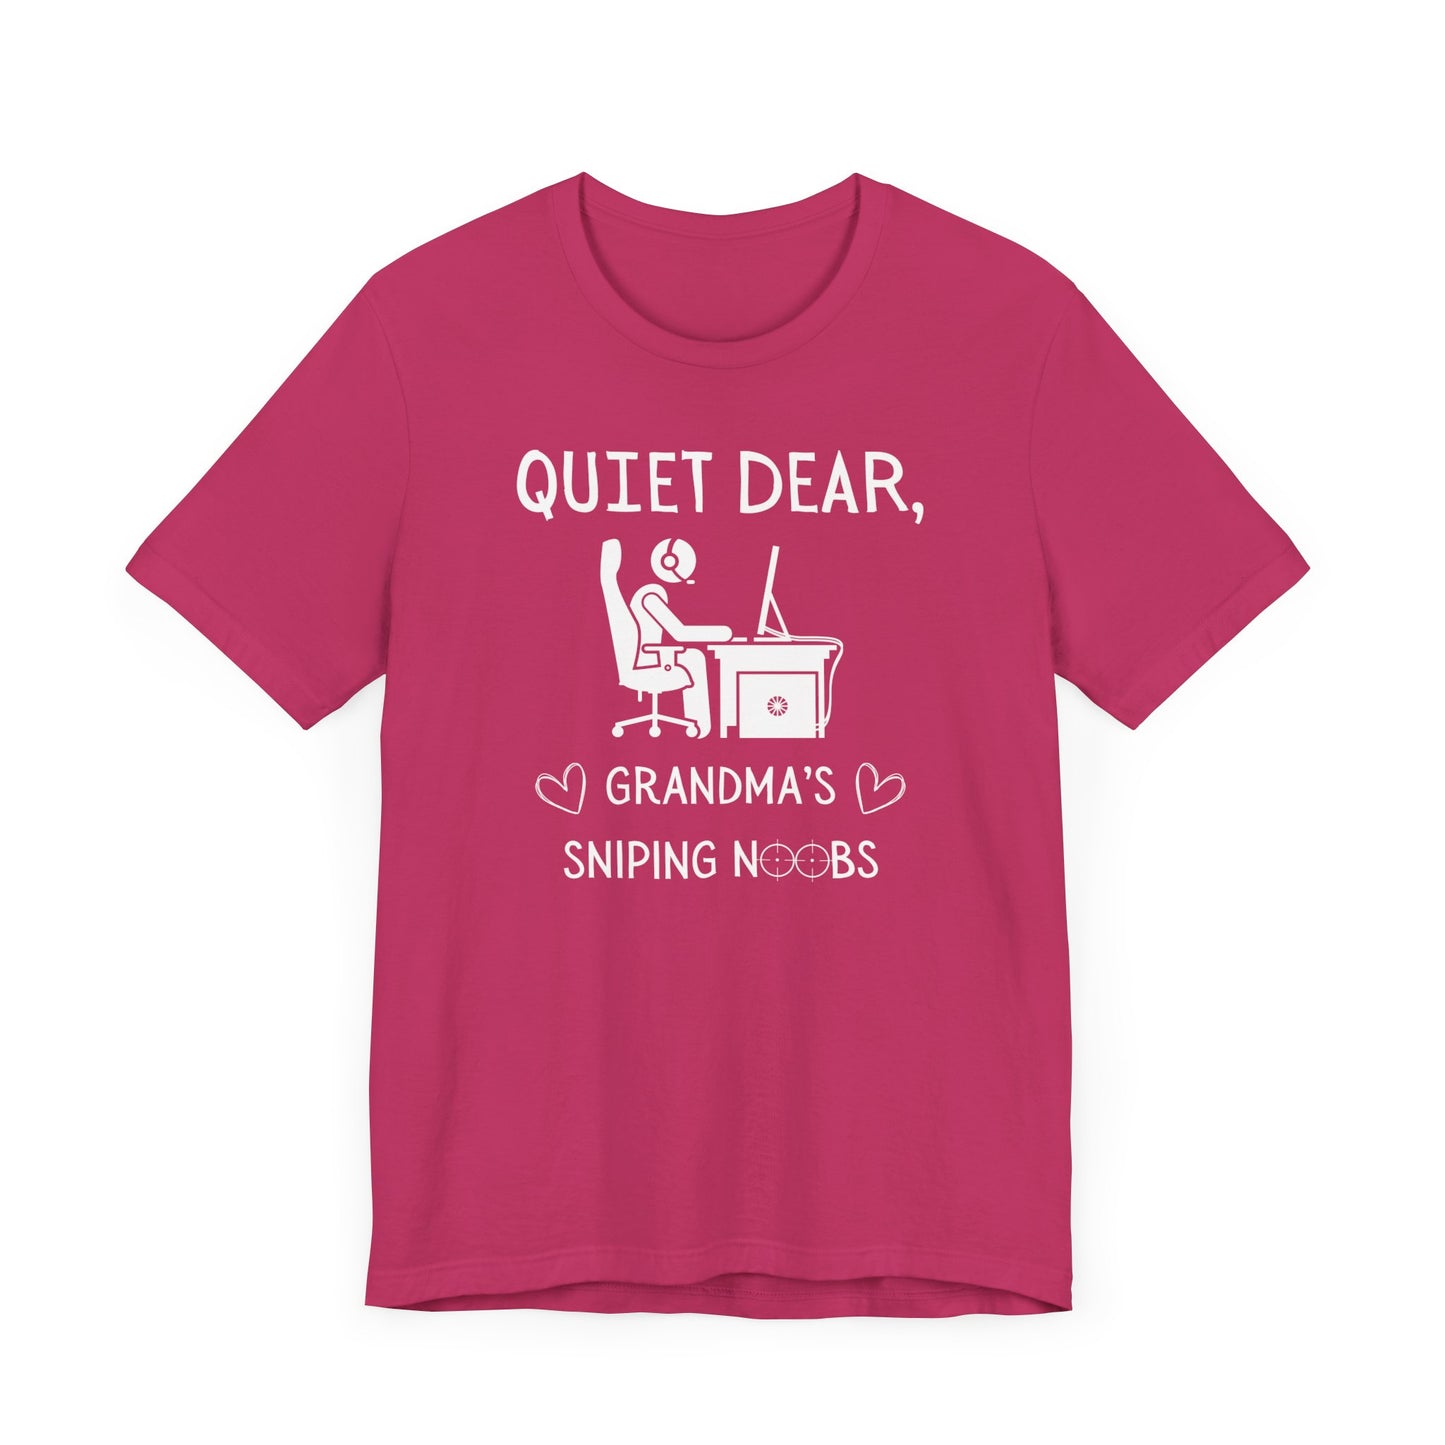 A flat image of a berry pink t-shirt that reads Quiet Dear, Grandma's Sniping Noobs in white text. The lower text is framed by two hearts, and the O's are in the shape of sniper scopes. In the center of the shirt is an image of a person at a desk with a gaming PC.